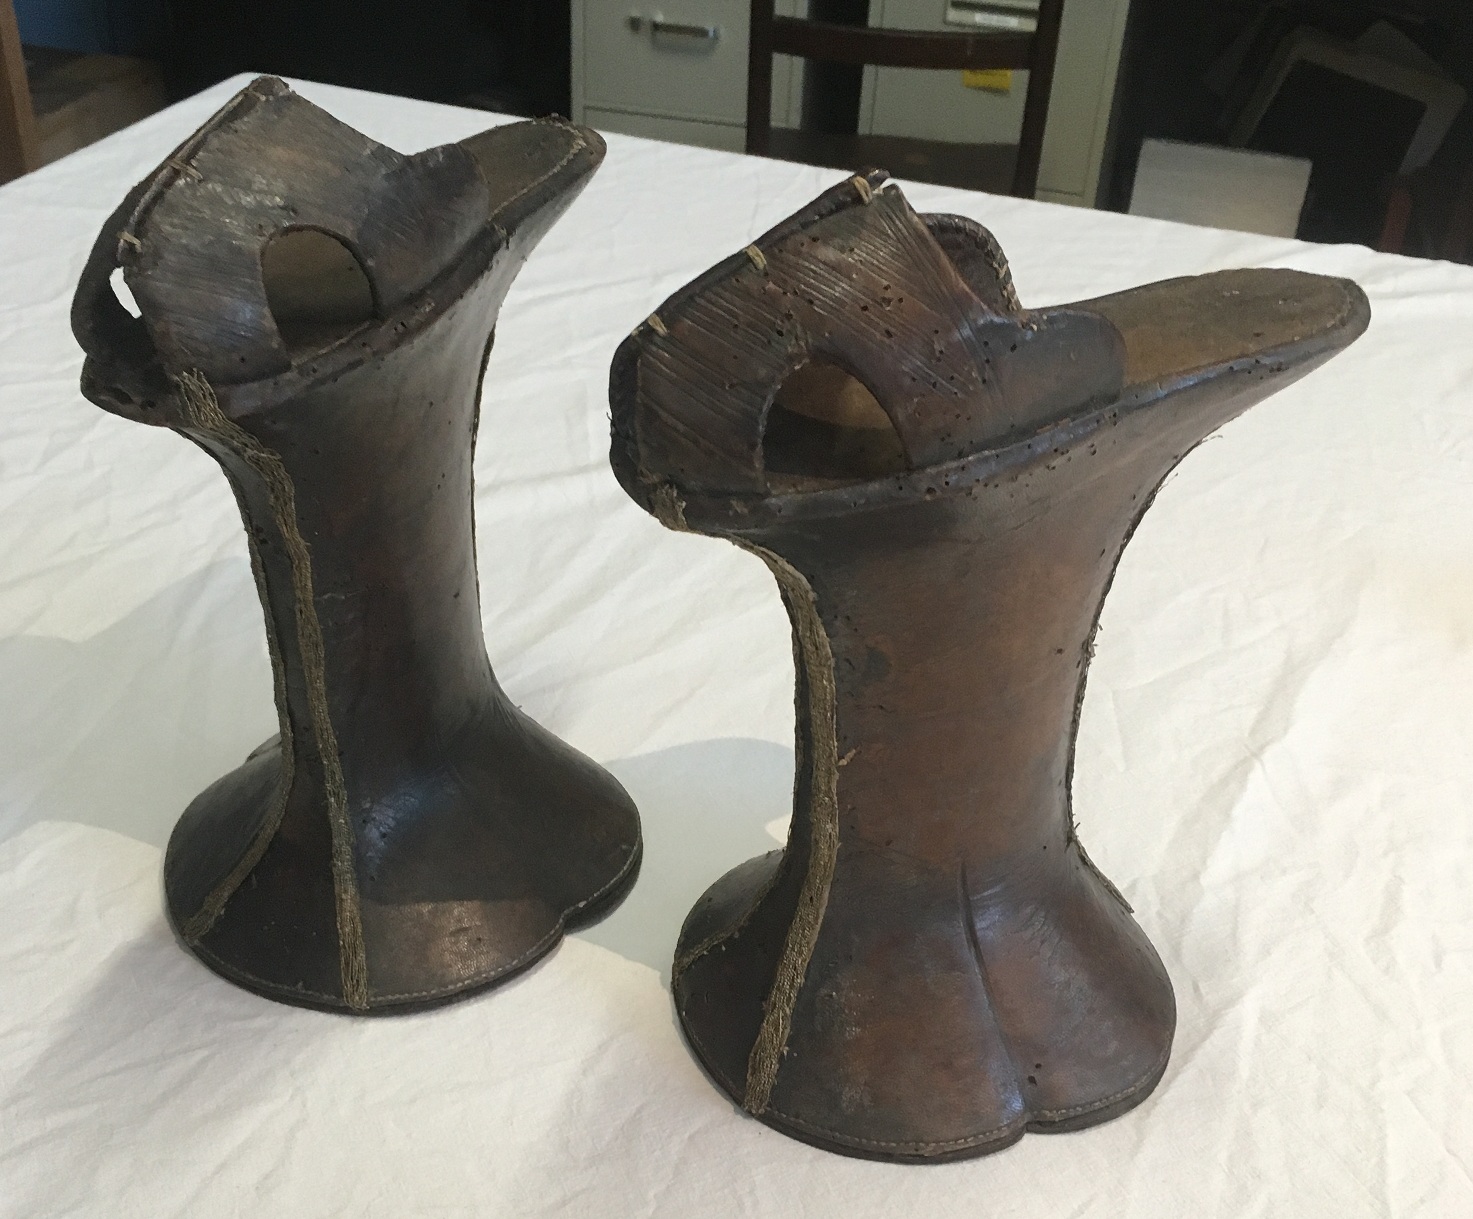 Chopine, Zoccolo, and Other Raised Heel and High Heel Construction